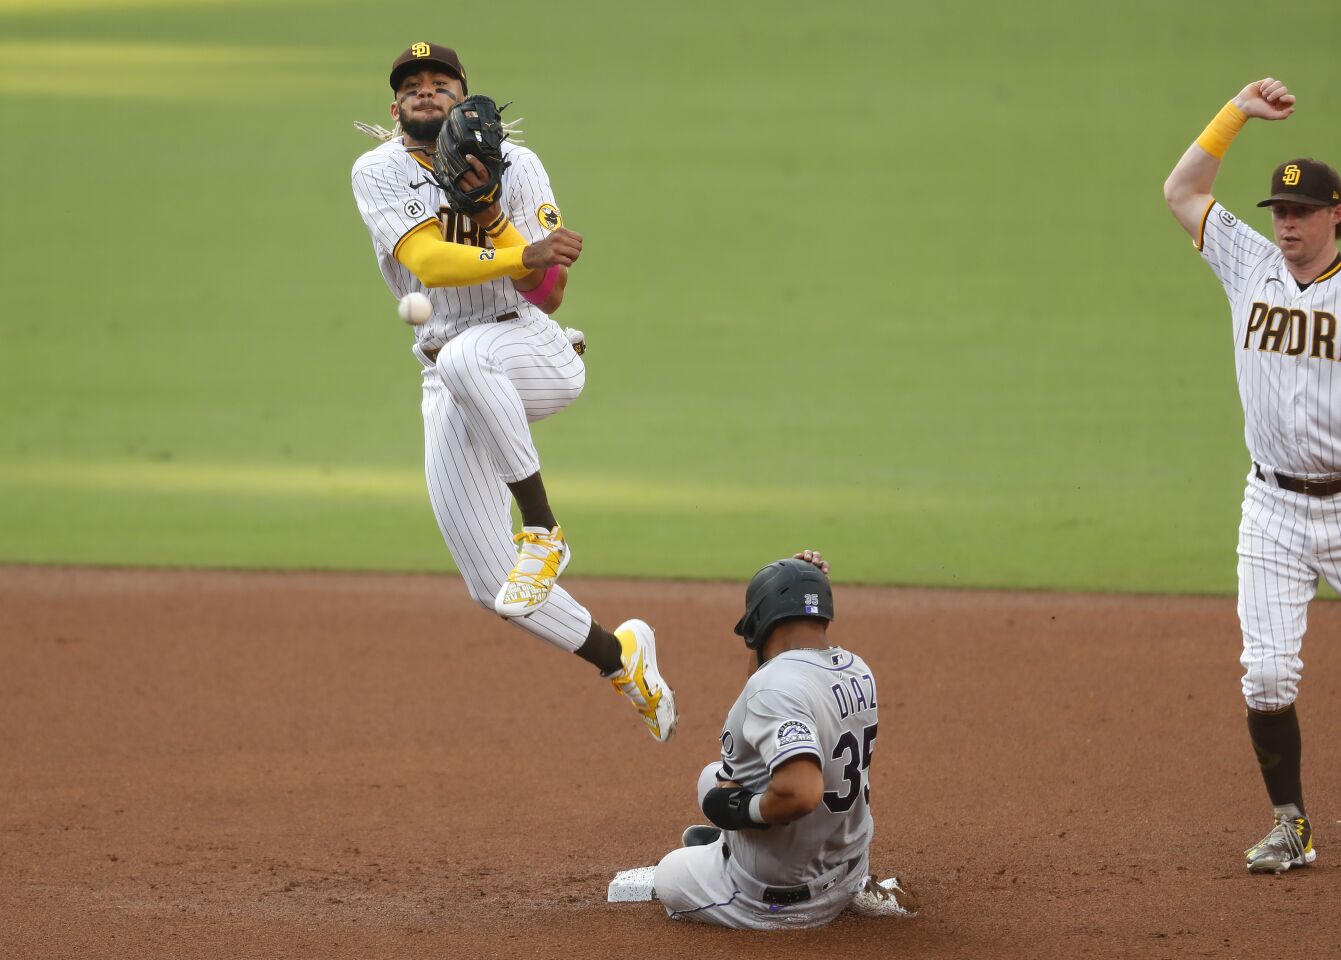 San Diego Padres Fernando Tatis Jr. forces out Elias Diaz of the Colorado Rockies as Raimel Tapia is safe at first base in the 3rd inning on Wednesday, Sept. 9, 2020.